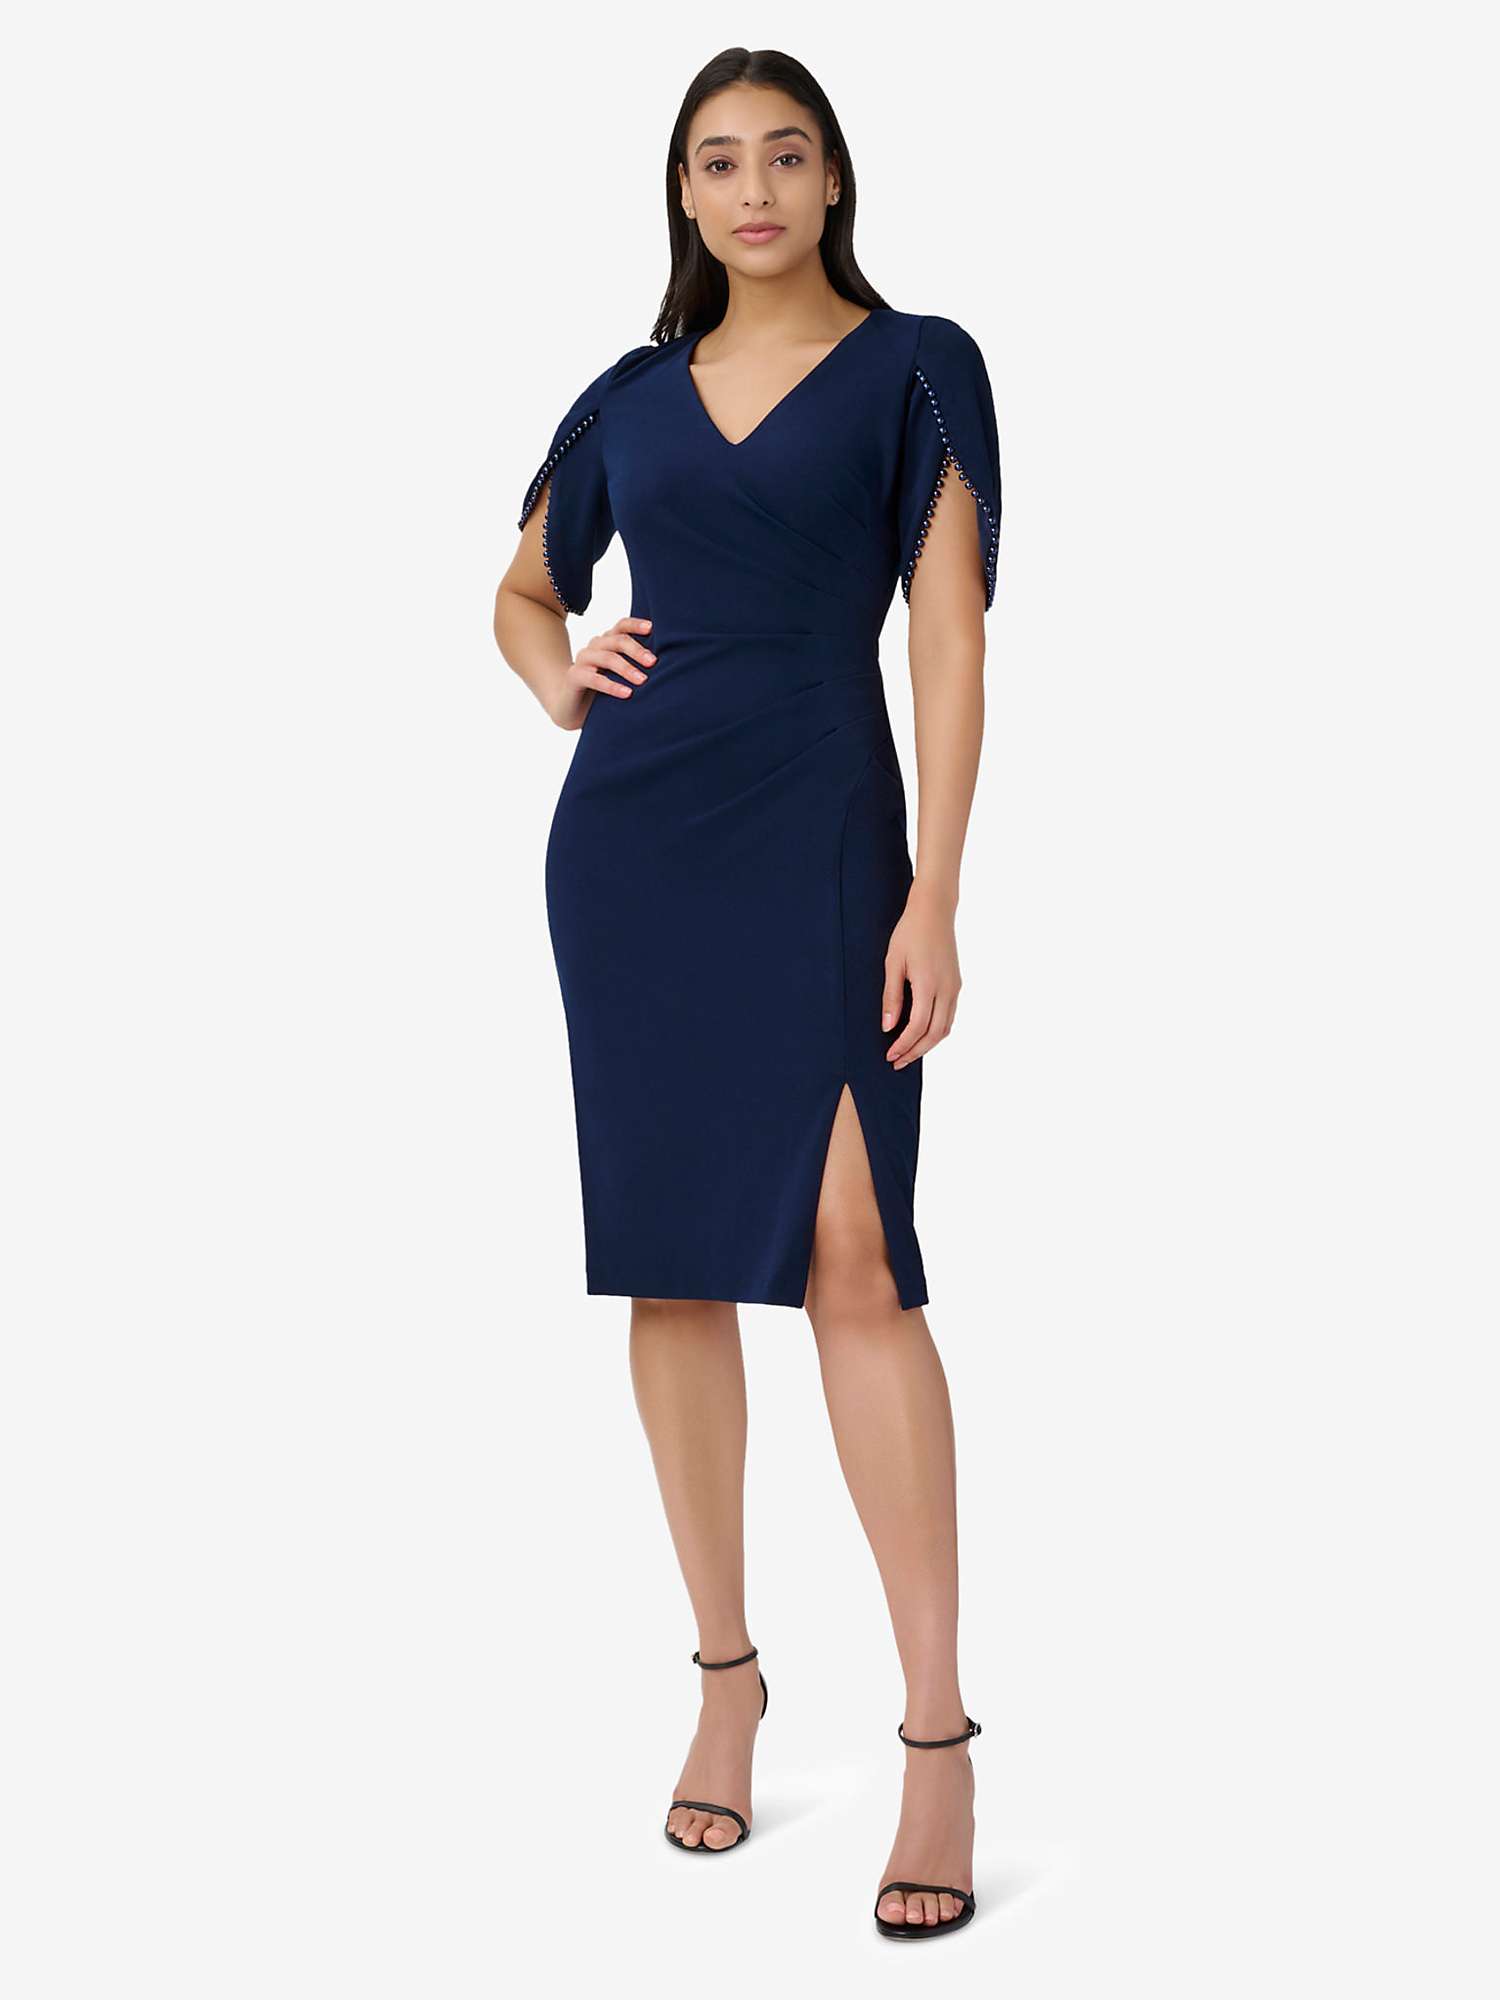 Buy Adrianna Papell Knit Crepe Pearl Trim Knee Length Dress Online at johnlewis.com